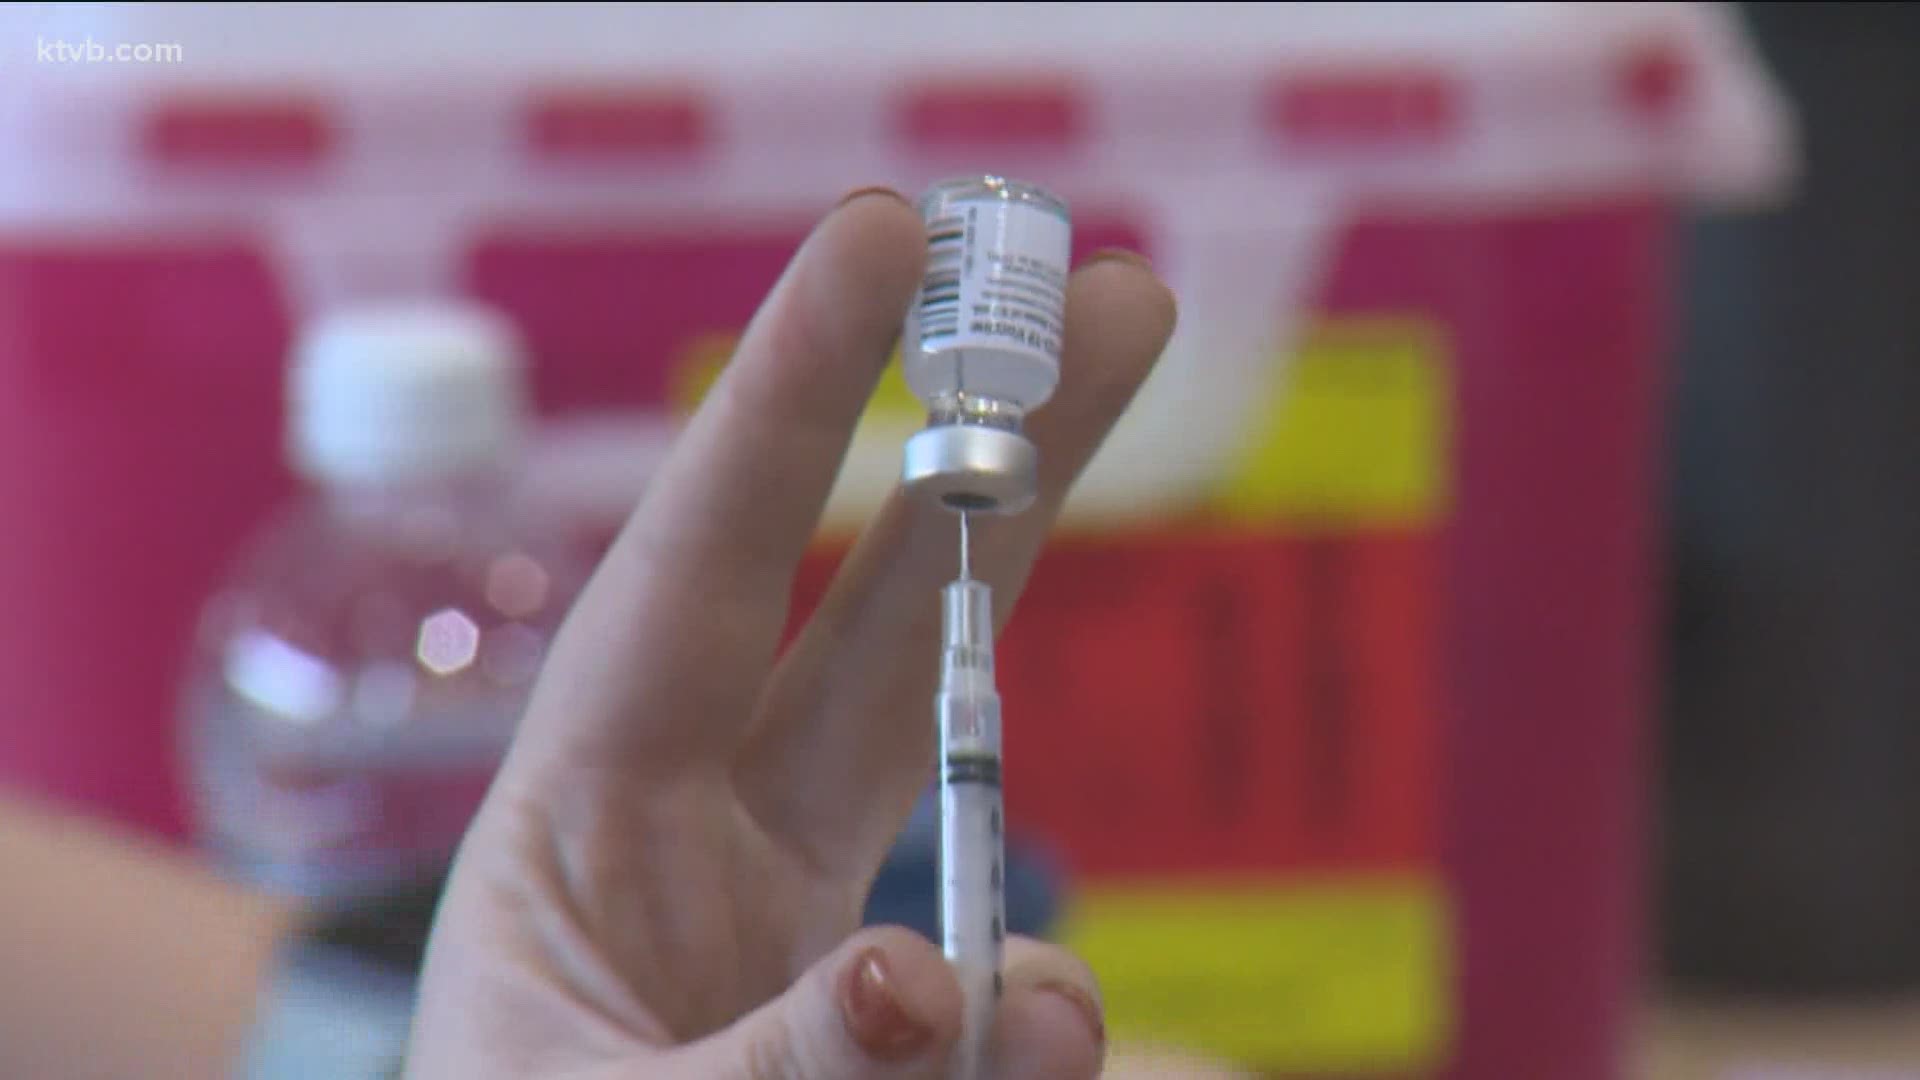 All Idahoans will be eligible to receive the vaccine by April 5.